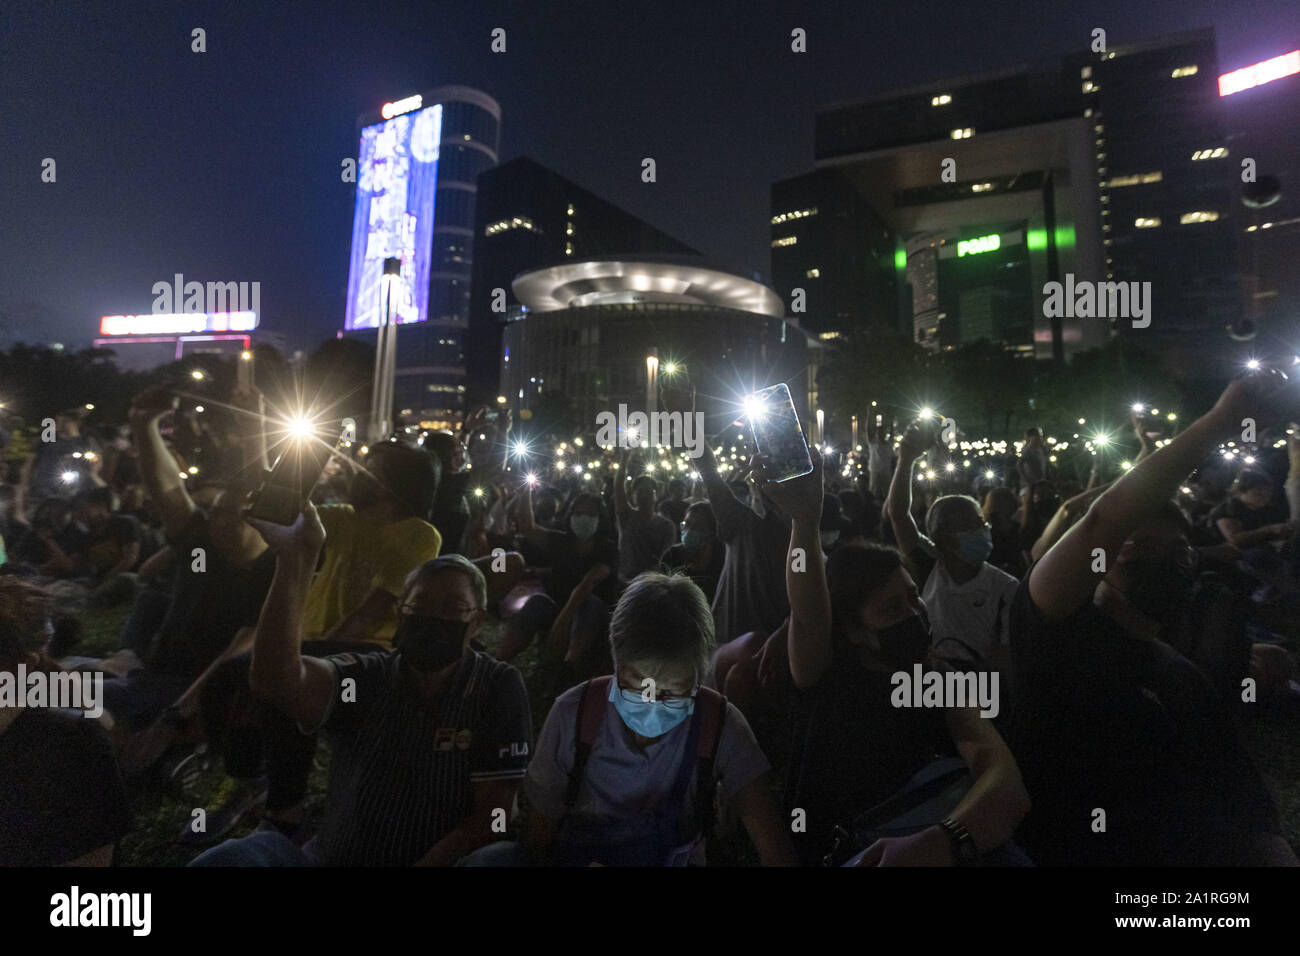 Hong Kong, China. 28th Sep, 2019. Thousands of pro democracy protesters gathered in Hong Kong's Tamar park to attend the Anti Authoritarianism Rally on the 5th anniversary of the start of the Yellow Umbrella Revolution. After the rally thousands of protesters approched the Cnetral Government Complex and began throwing stones and molotov cocktails at the barriers surrounding the complex. Hong Kong police deployed a water cannon vehicle and riot police to disperse the protesters. Credit: Adryel Talamantes/ZUMA Wire/Alamy Live News Stock Photo